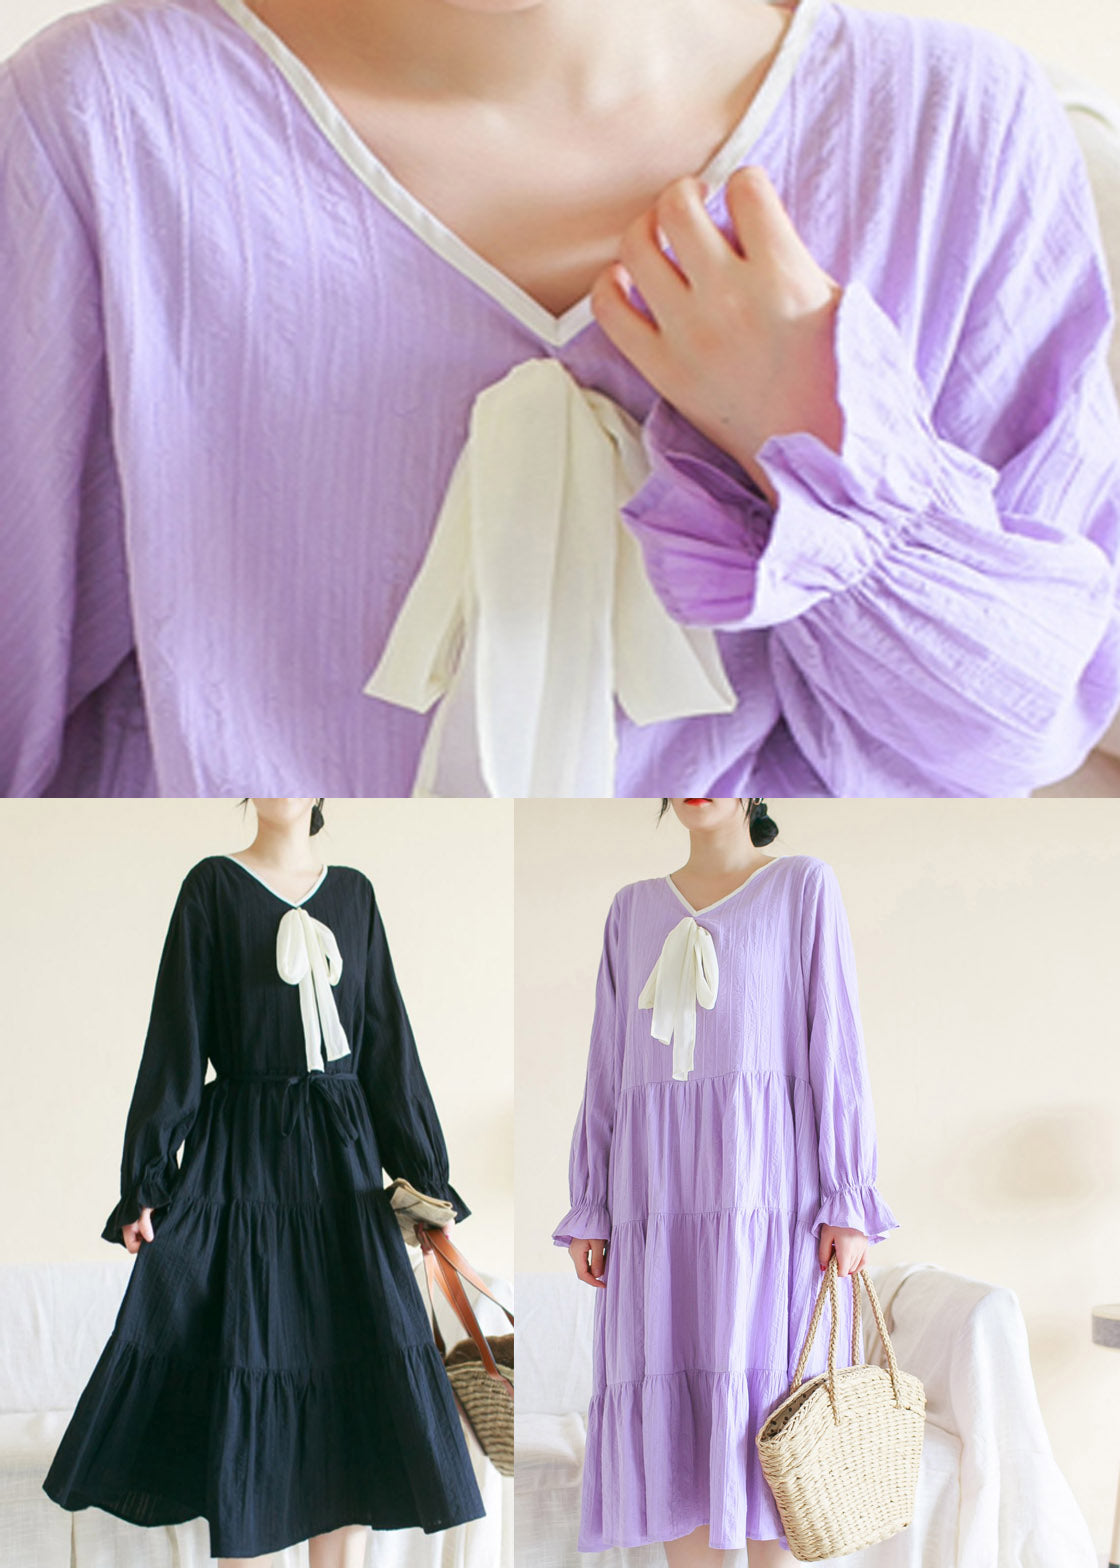 Black Wrinkled Solid Cotton Long Dress Long Sleeve TI1010